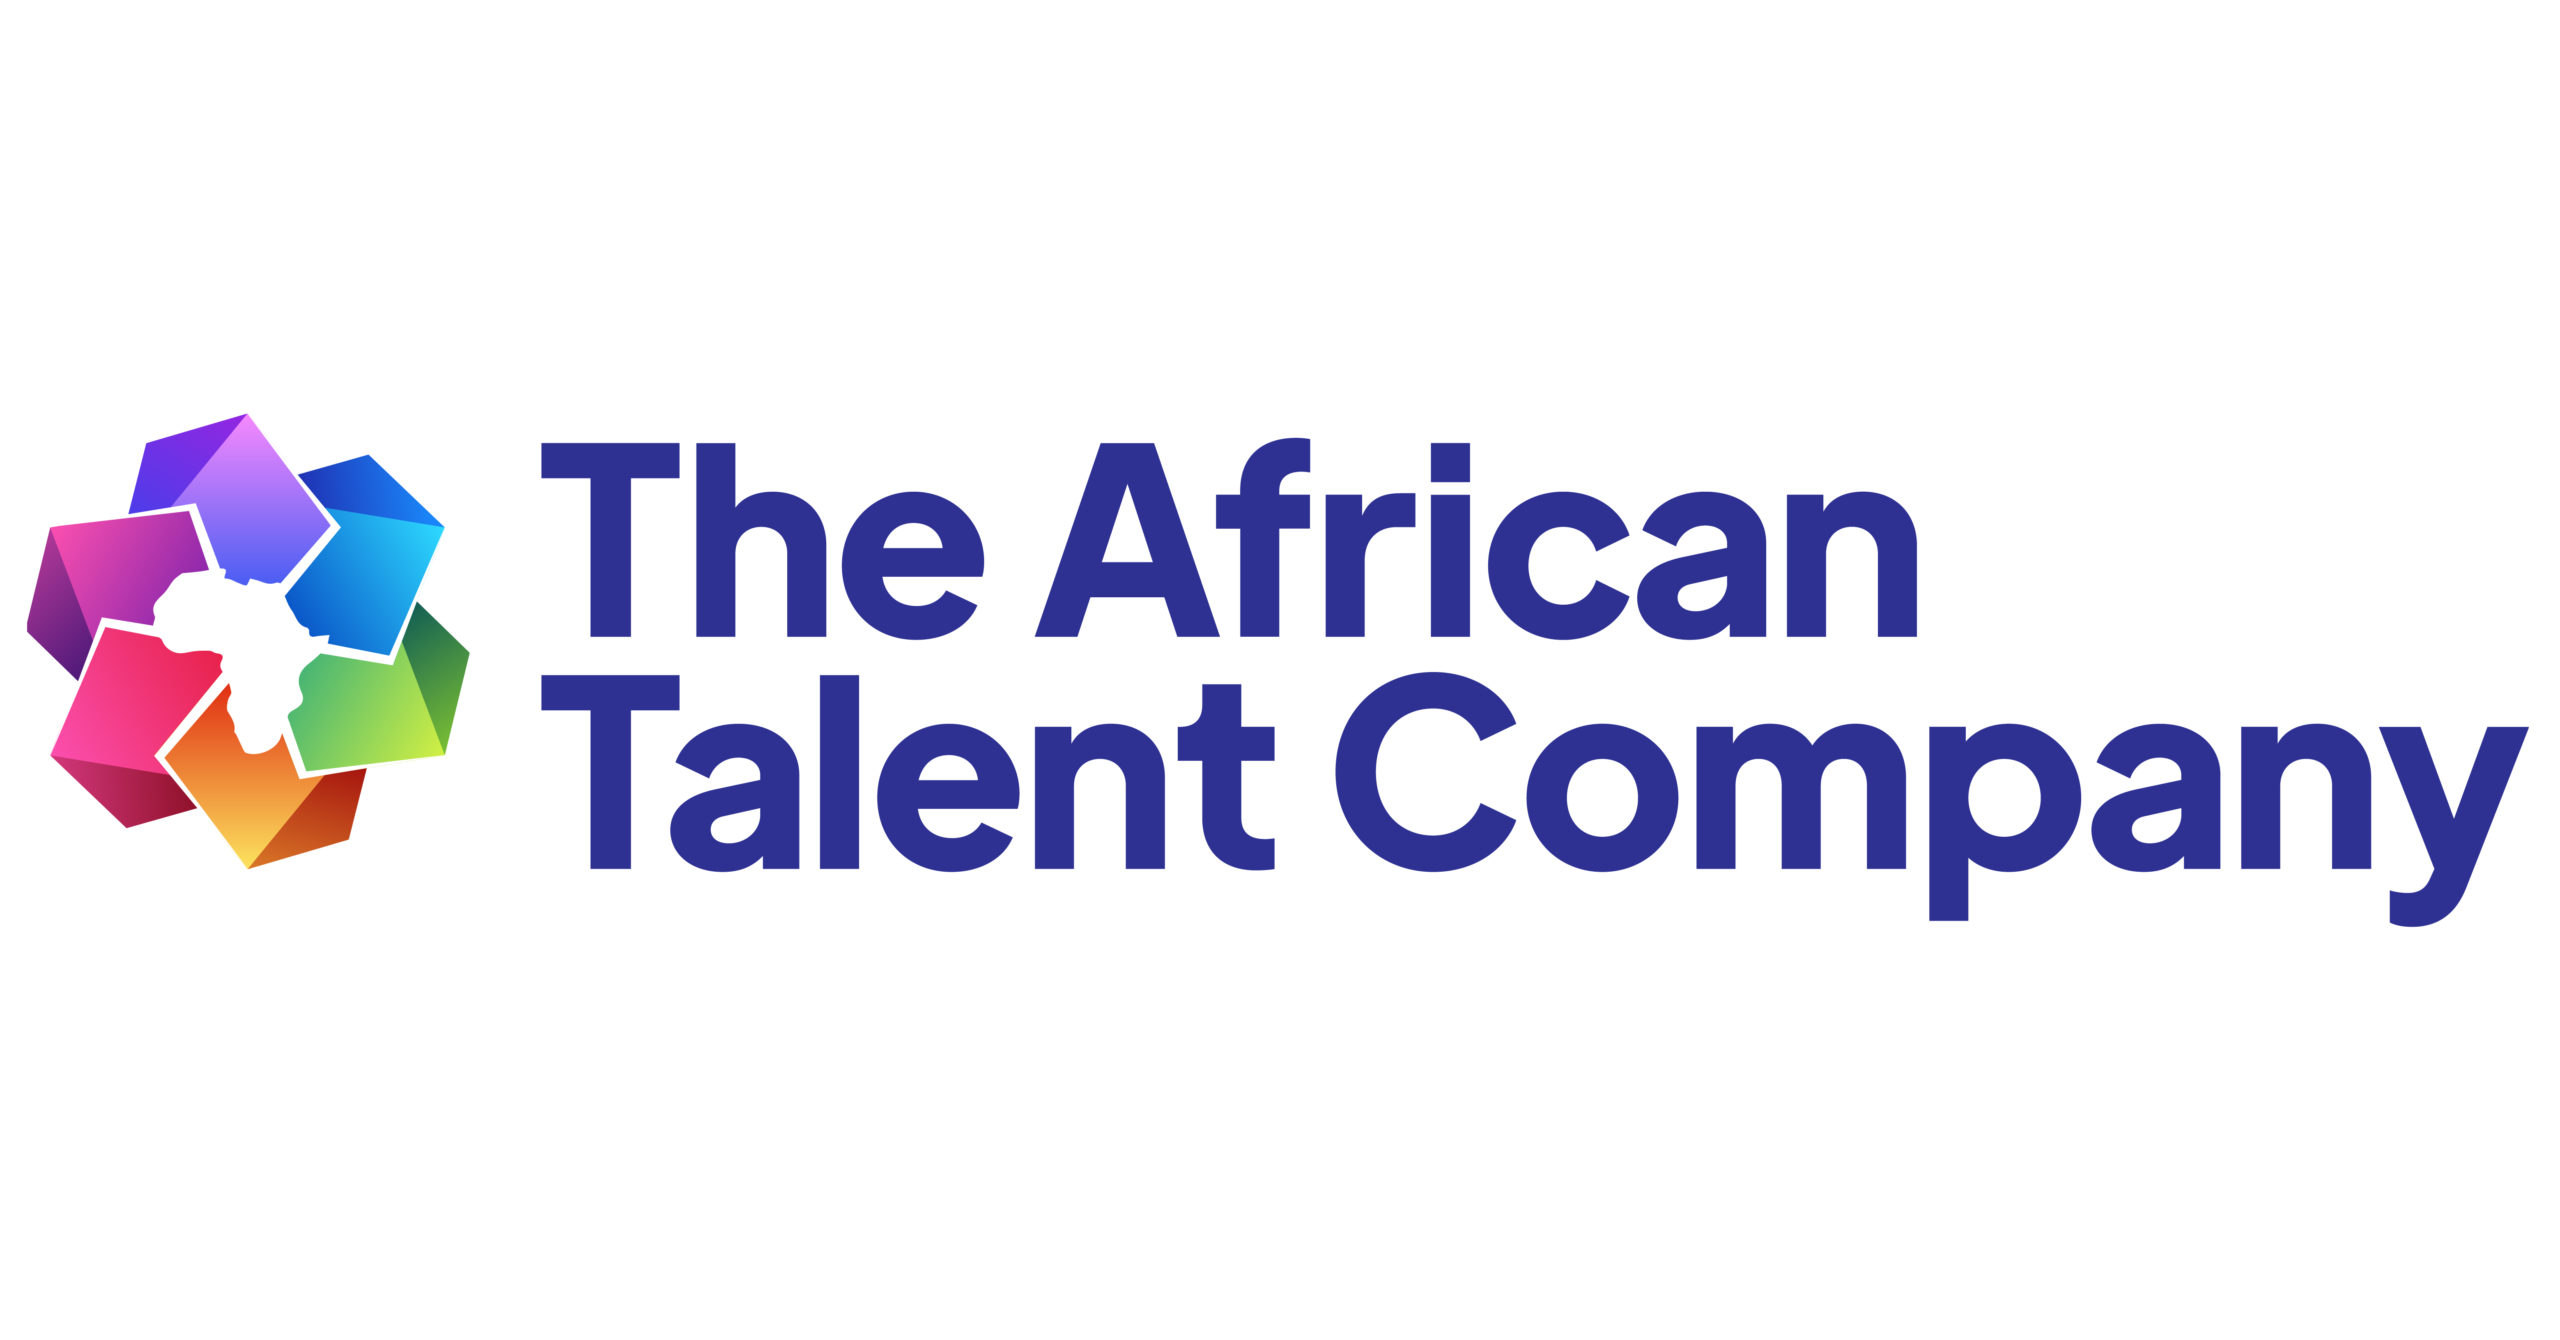 The African Talent Company